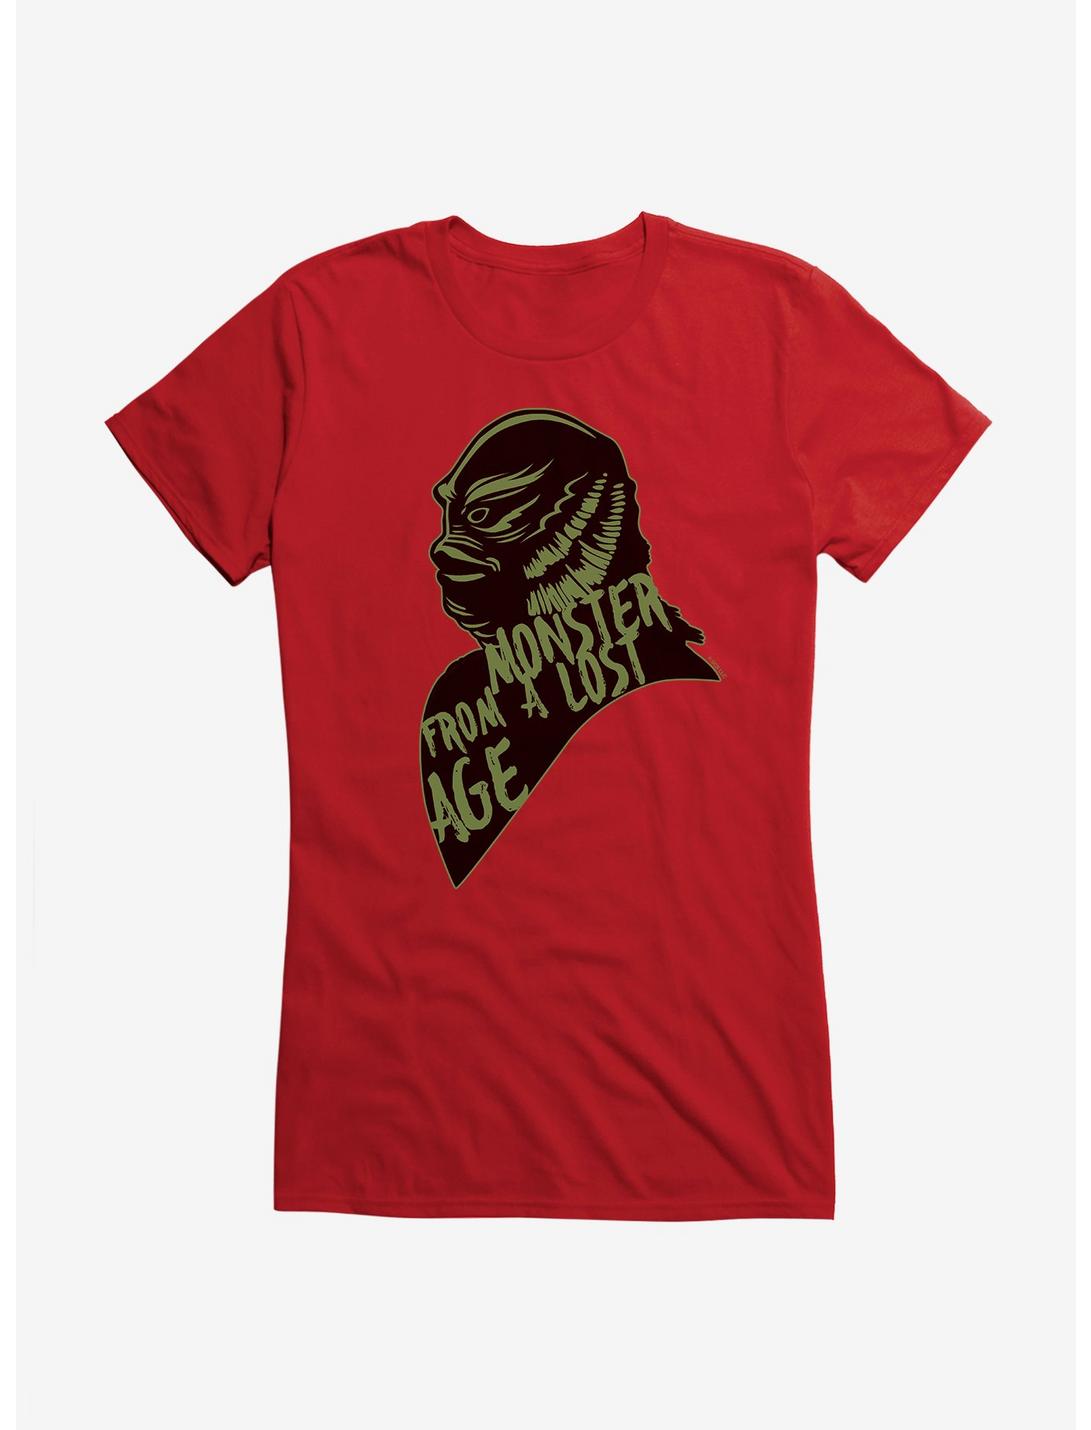 Universal Monsters Creature From The Black Lagoon Monster From a Lost Age Girls T-Shirt, , hi-res